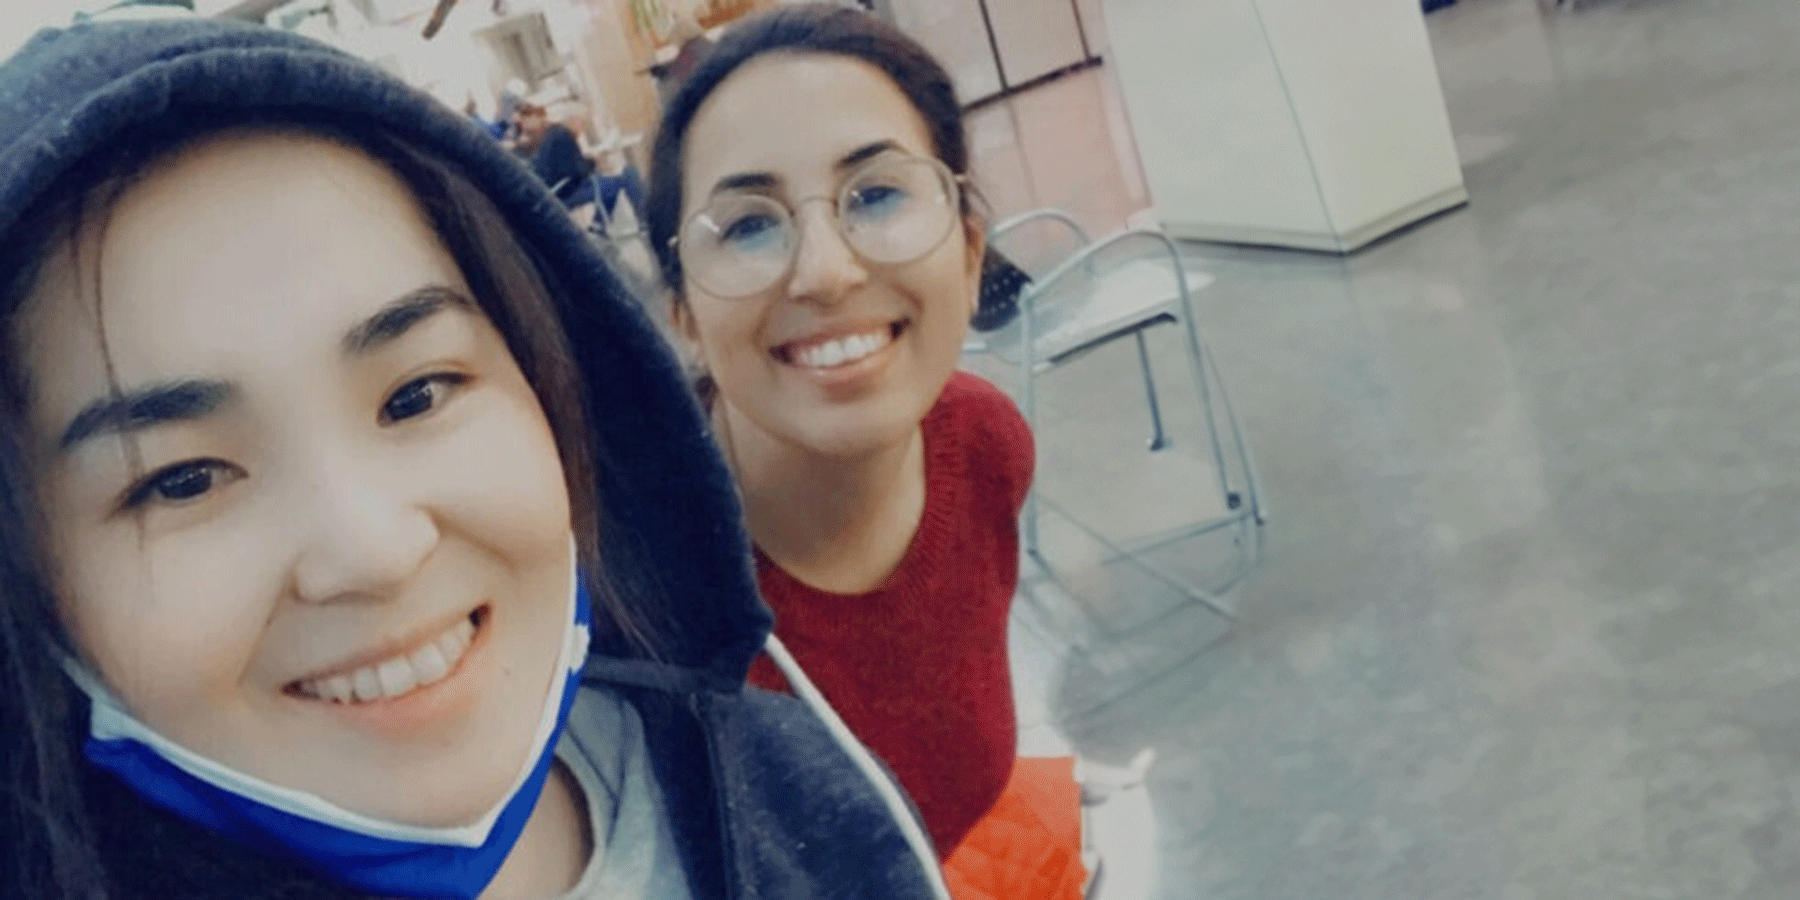 Two female students of Asian heritage pose for a selfie. On the left is a female student with brown hair. She wears a dark grey jacket with the hood up, and a blue mask pulled down from her mouth. On the right is a female student with brown hair pulled back. She wears glasses and a red sweater. Behind them are cabinets, a chair, and other individuals blurred in the background.